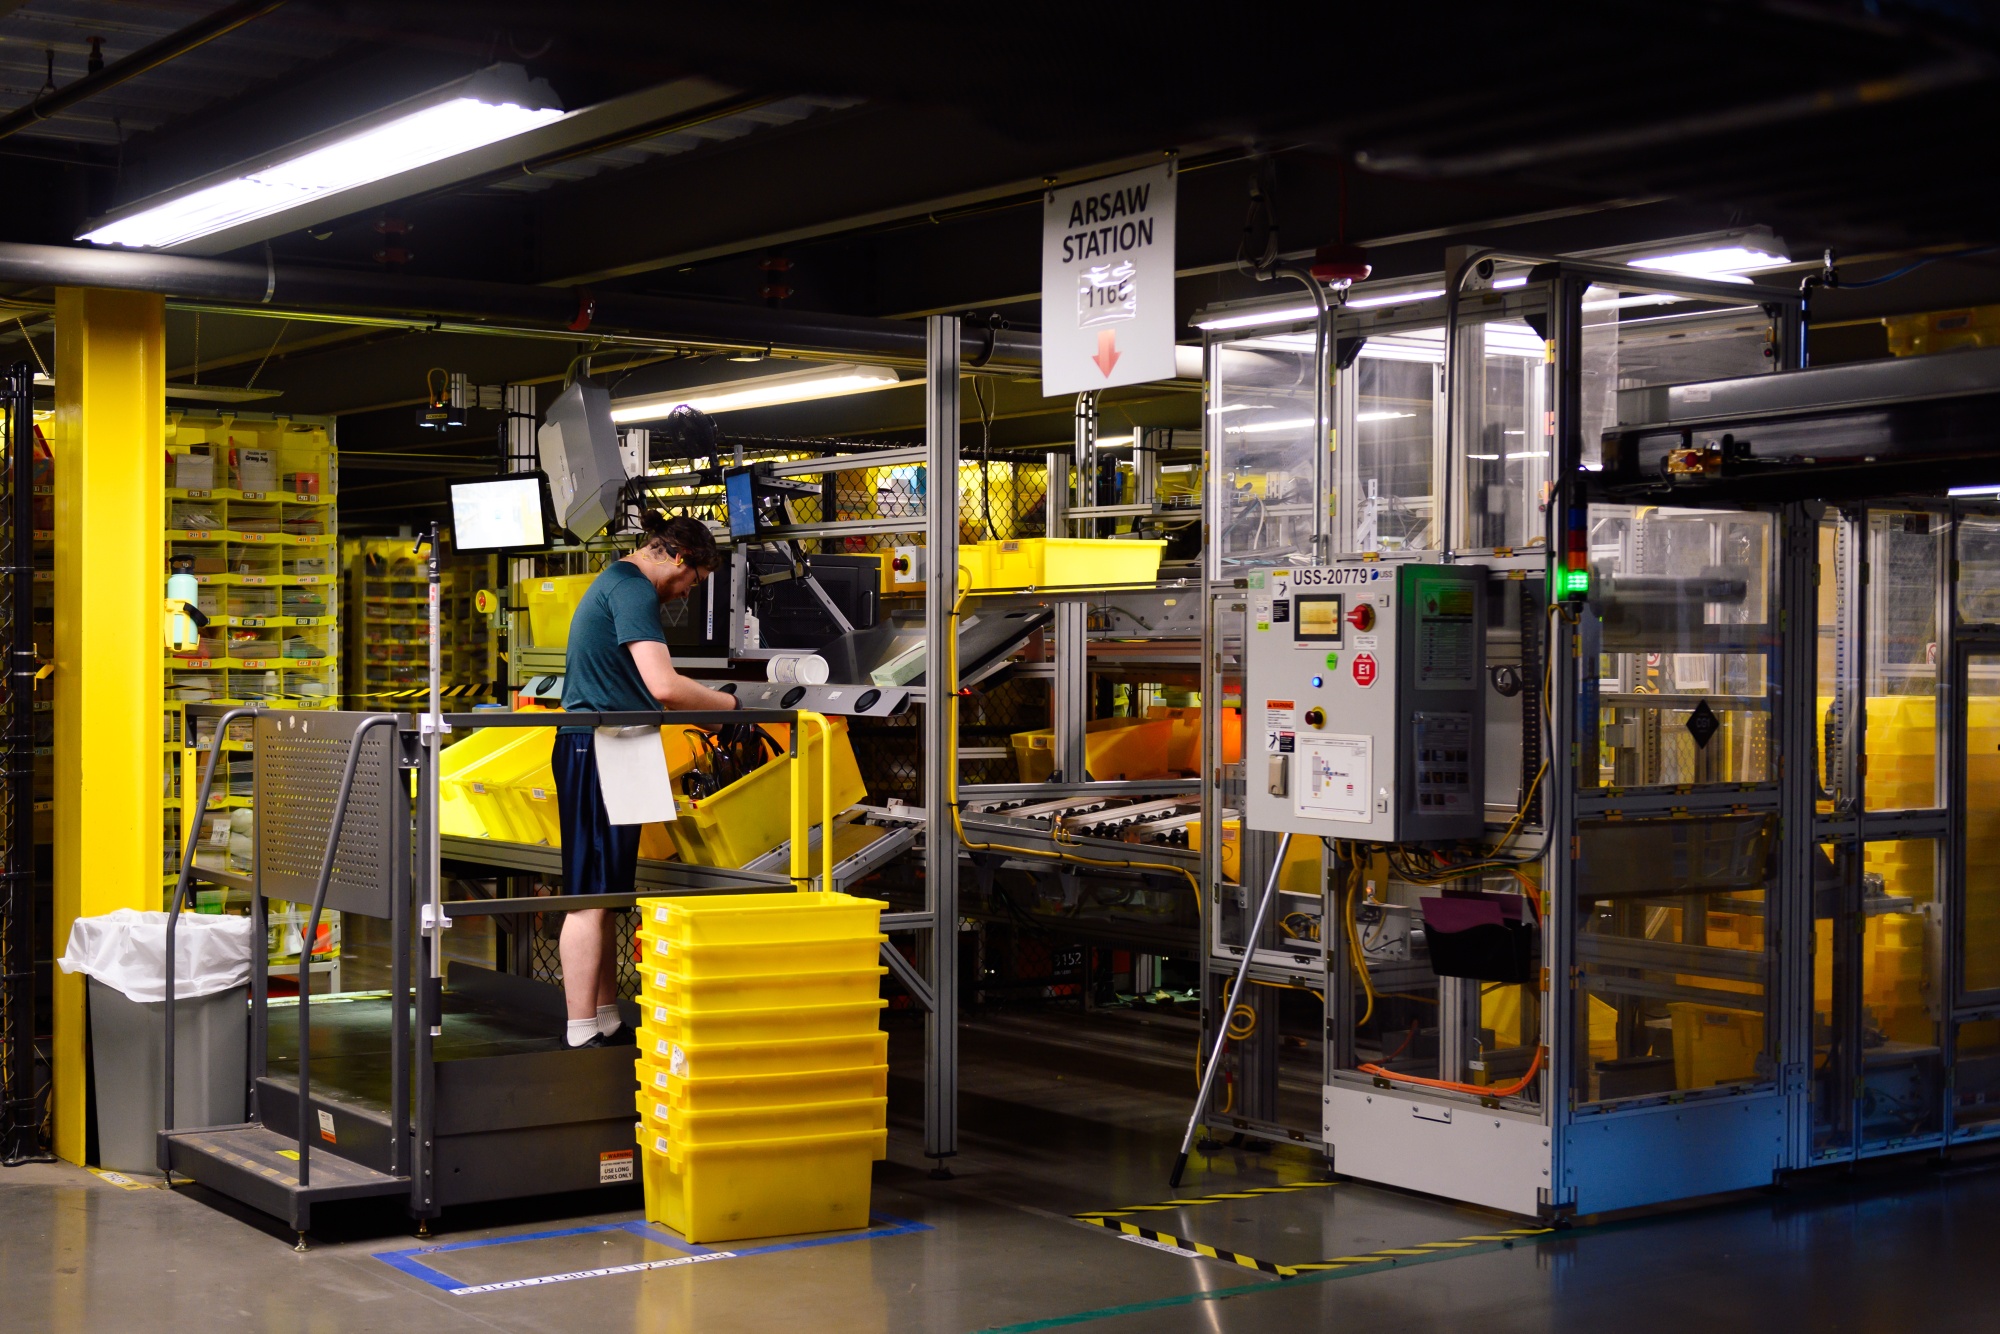 Amazon’s BFI4 fulfillment center in Kent, Washington, where state inspectors strapped ergonomic monitors to workers.